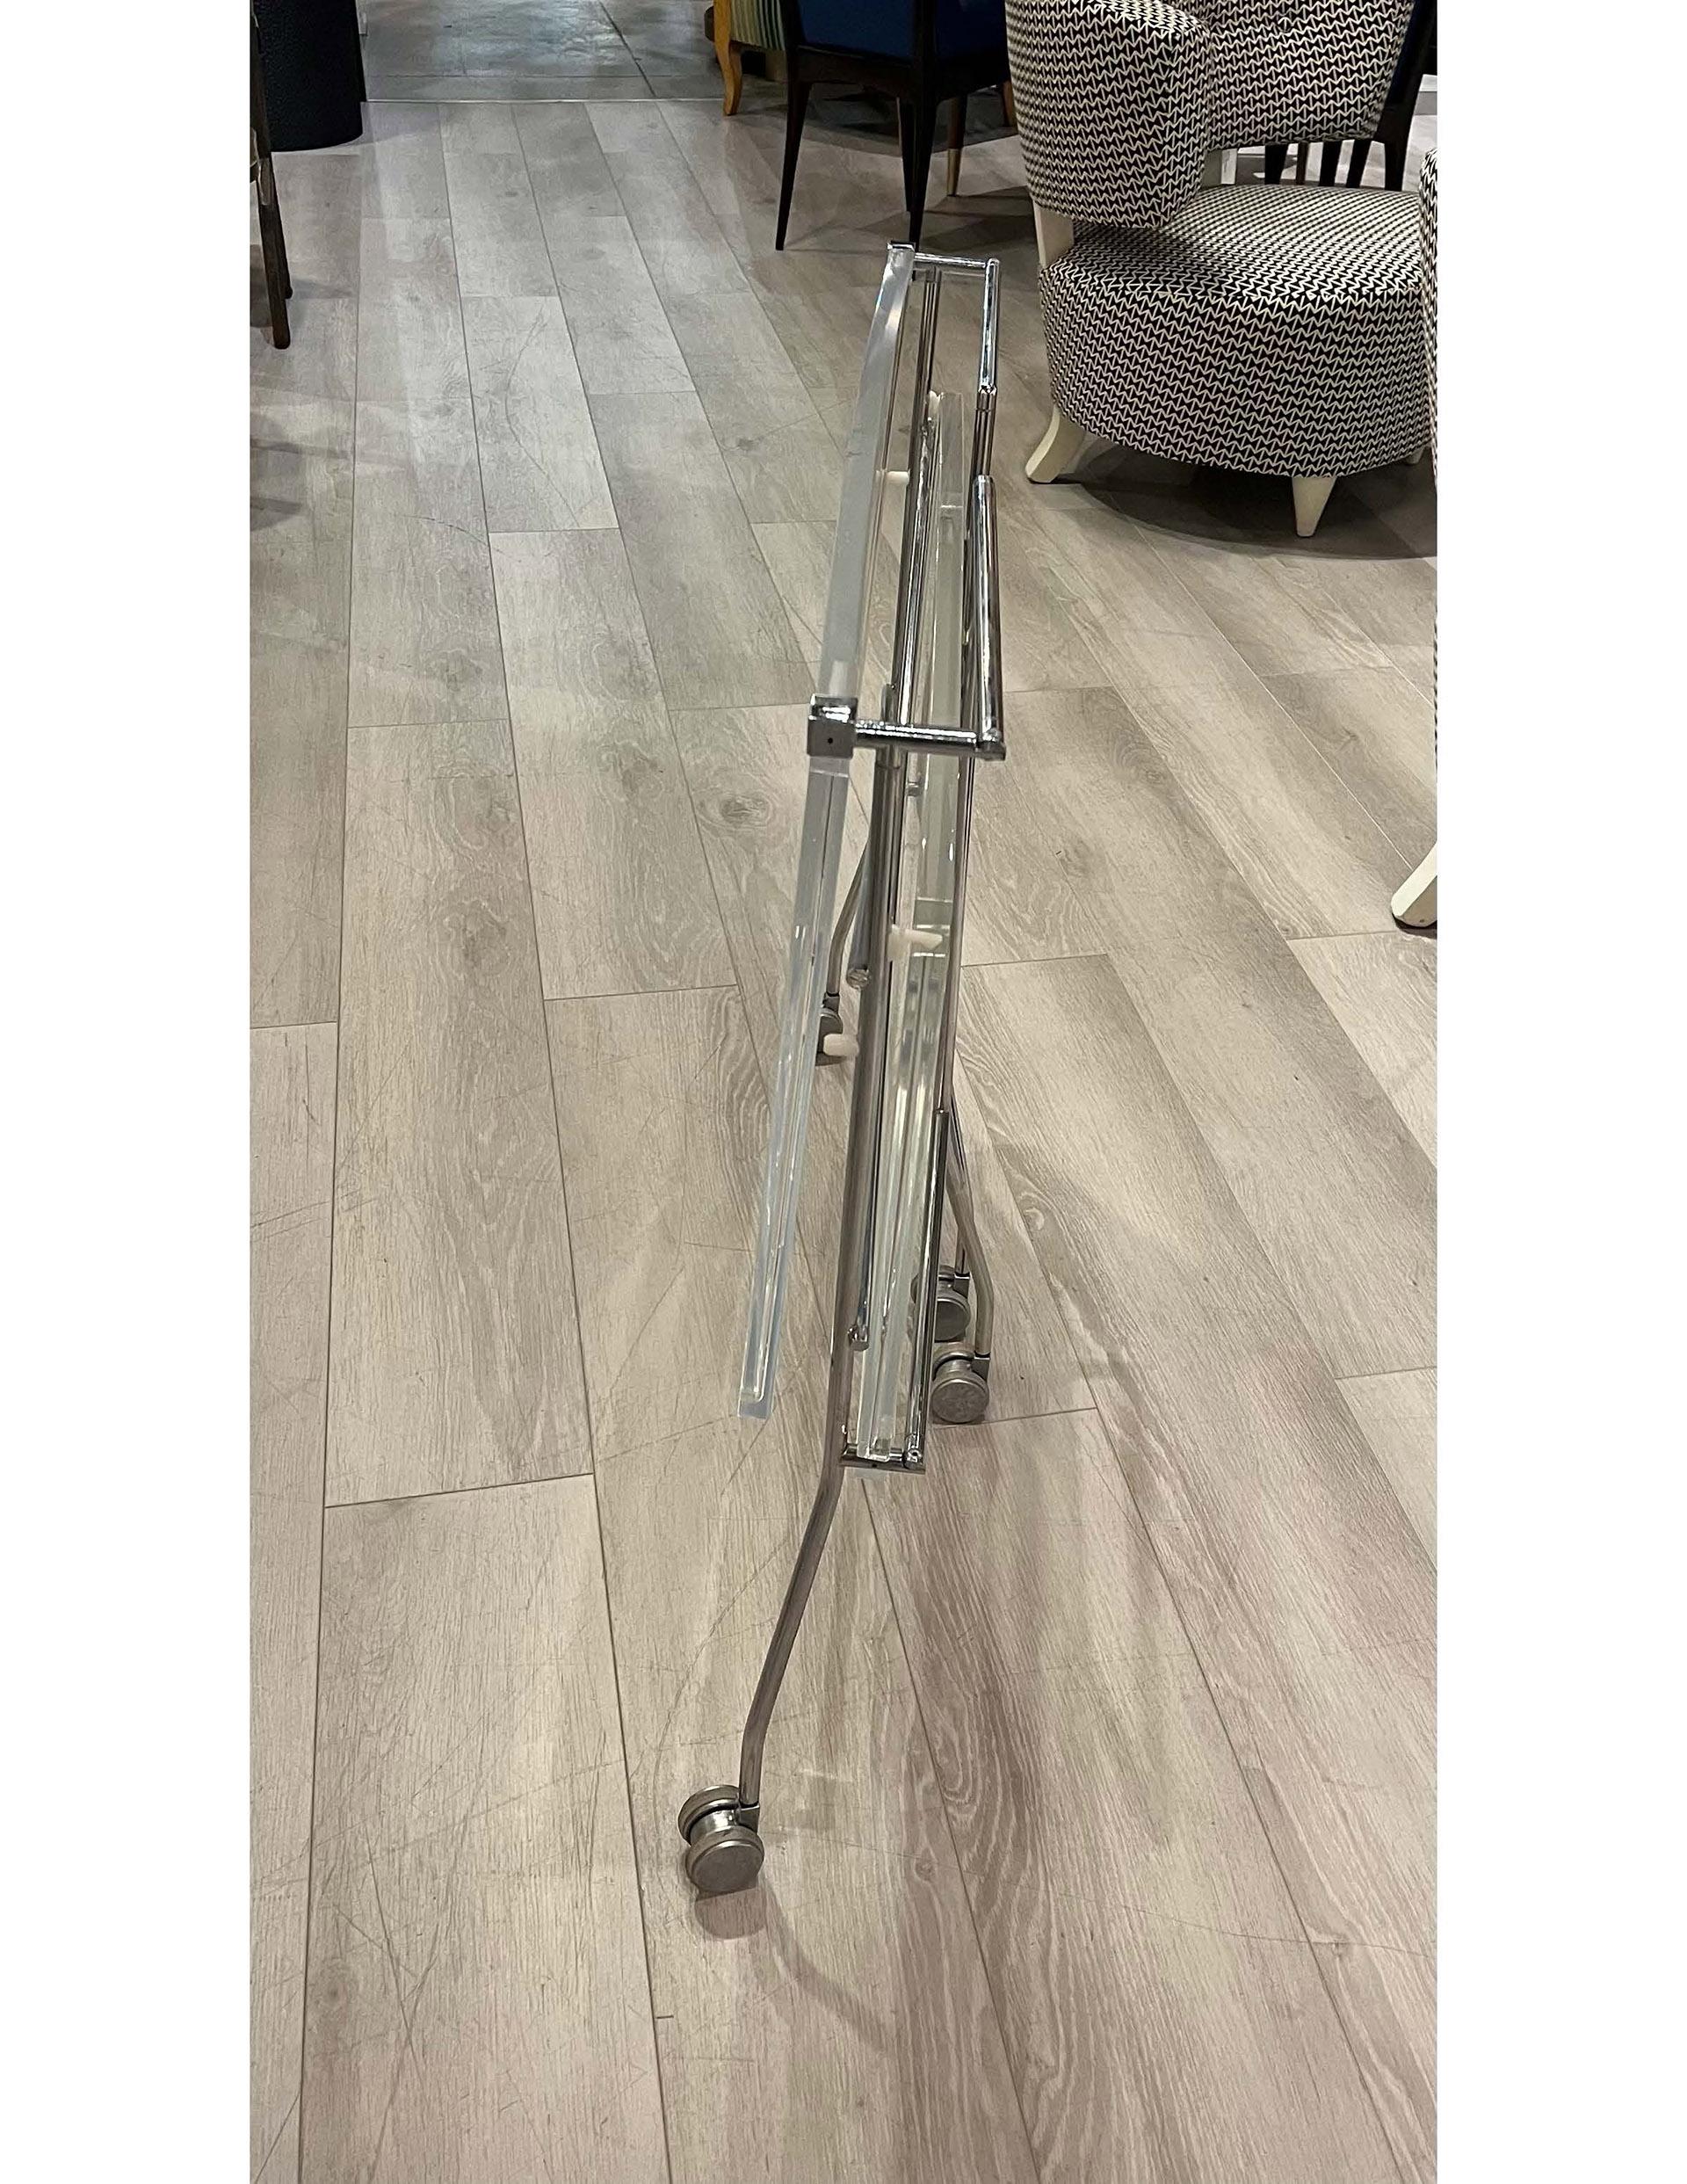 Flip Folding Trolley Table by A. Citterio with Toan Nguyen for Kartell For Sale 1